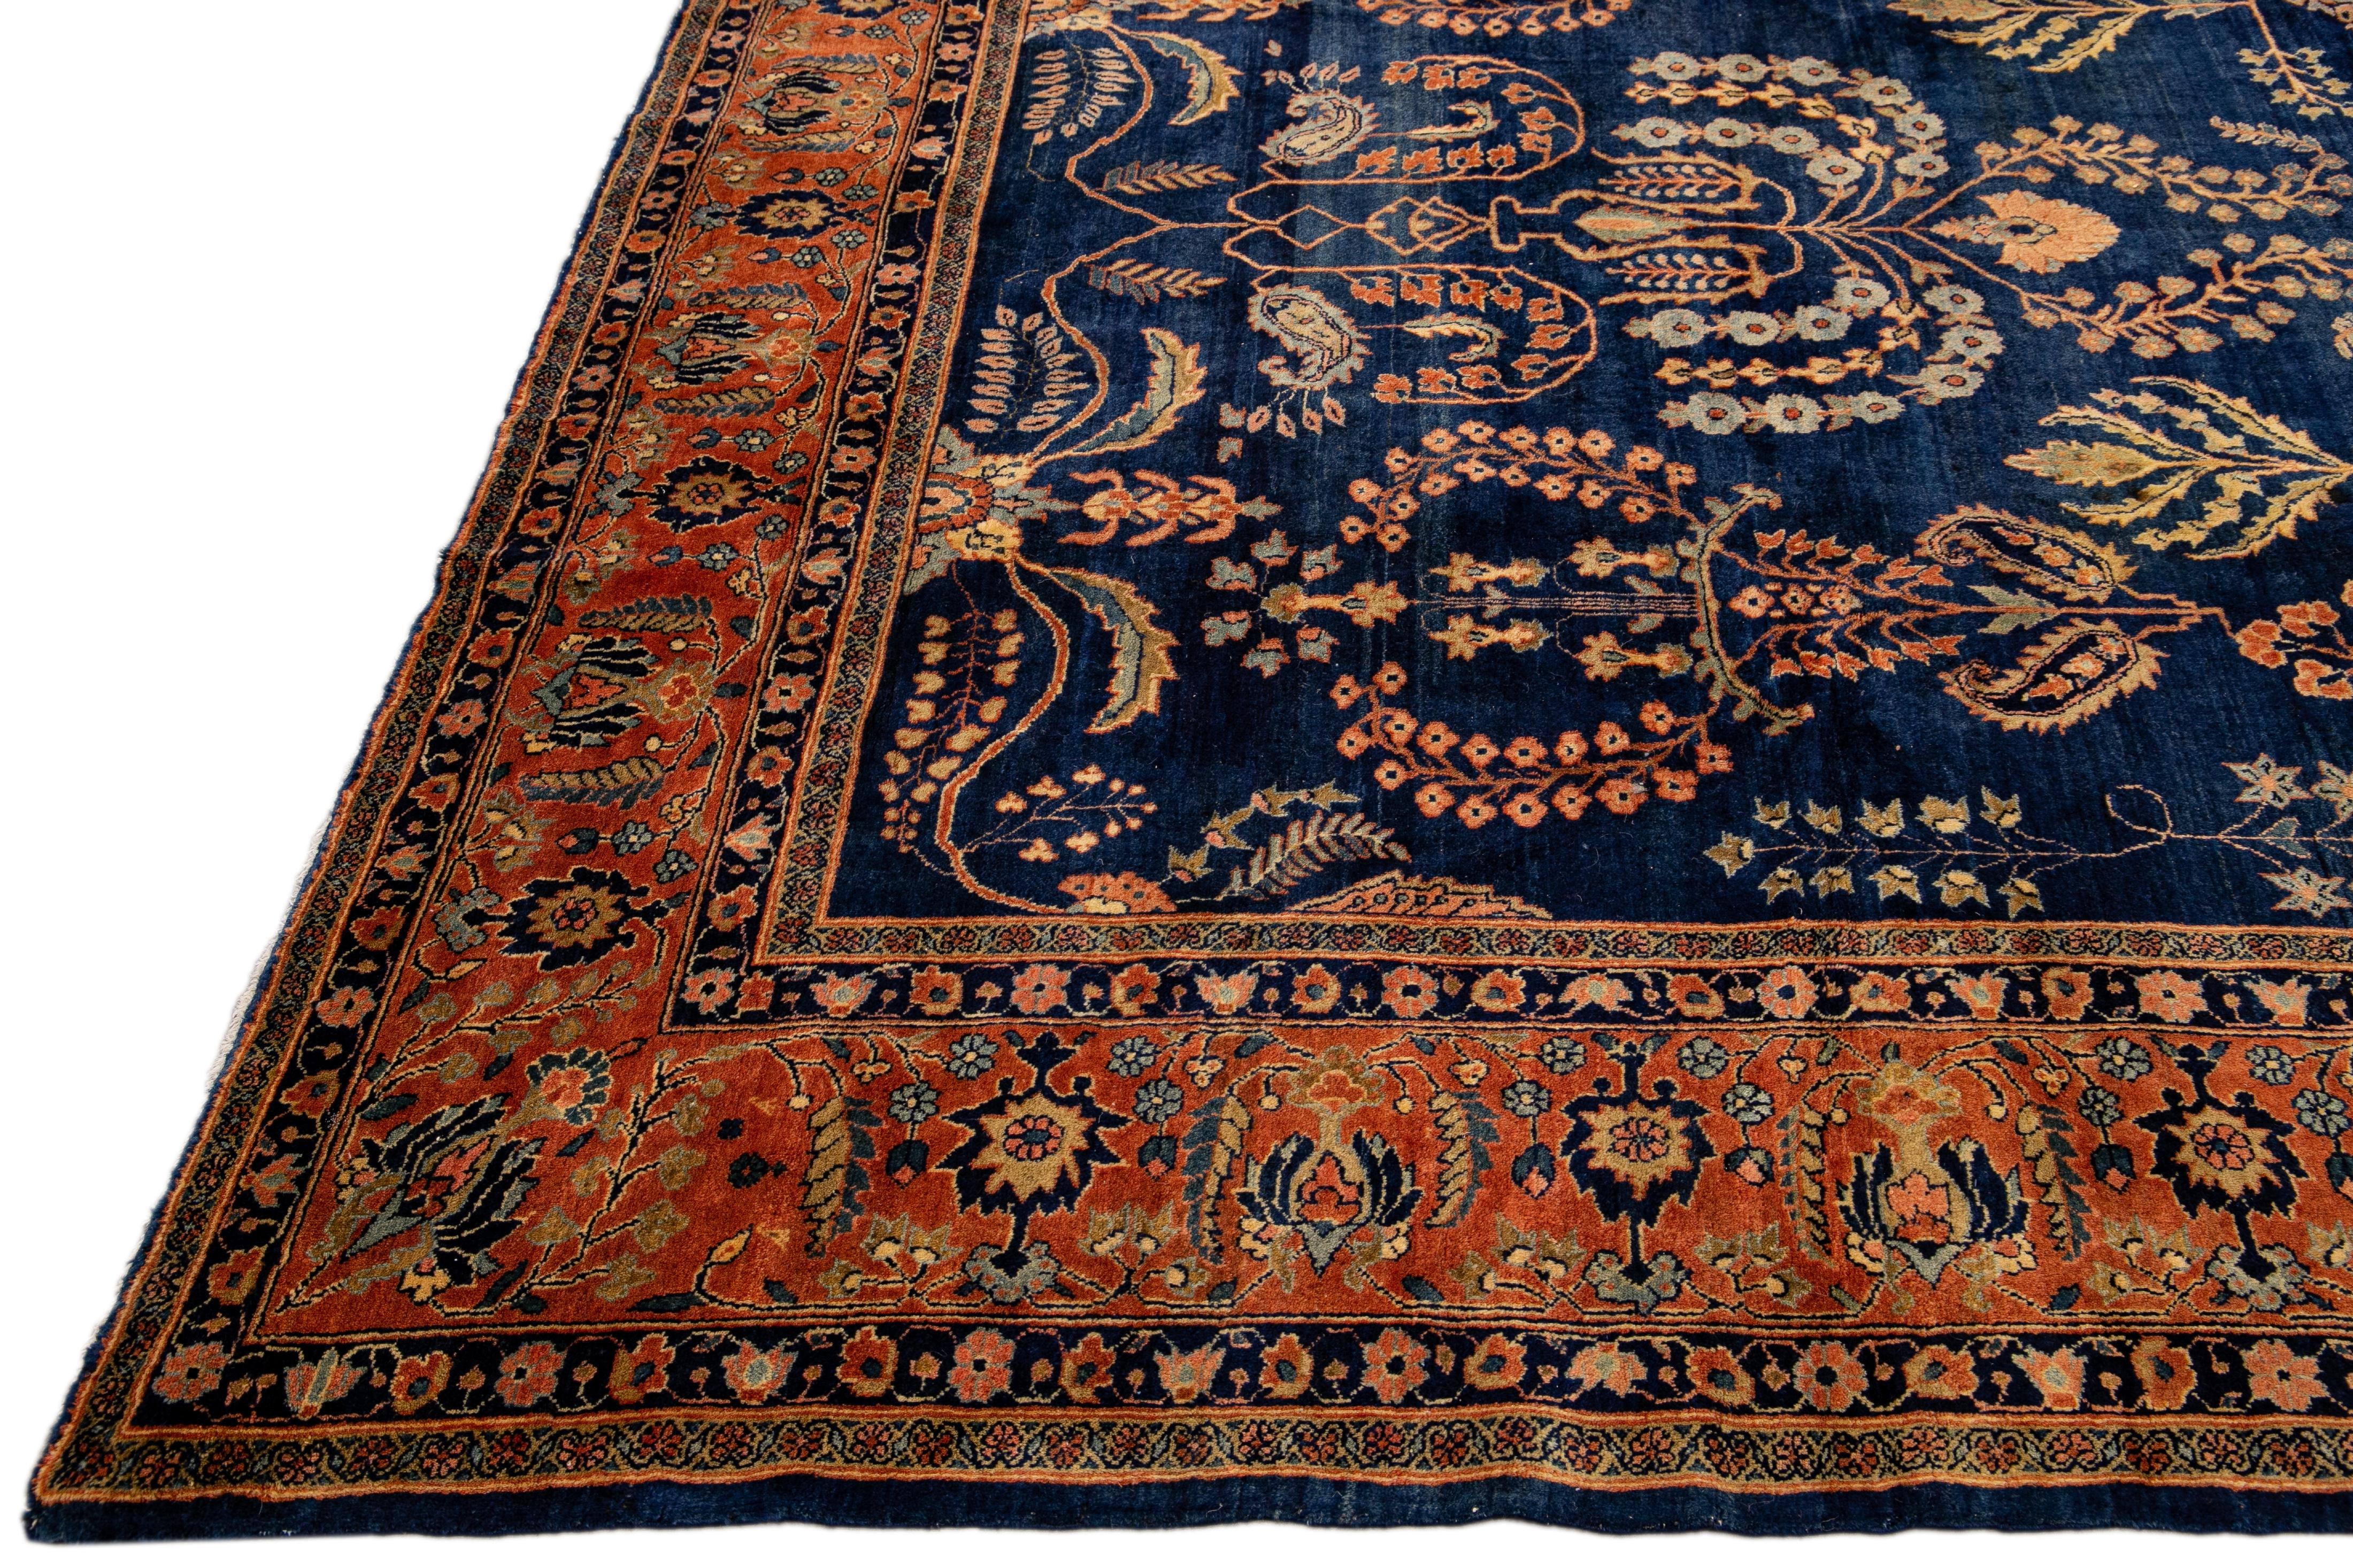 Antique Persian Sarouk Farahan Handmade Allover Designed Navy Blue Wool Rug In Excellent Condition For Sale In Norwalk, CT